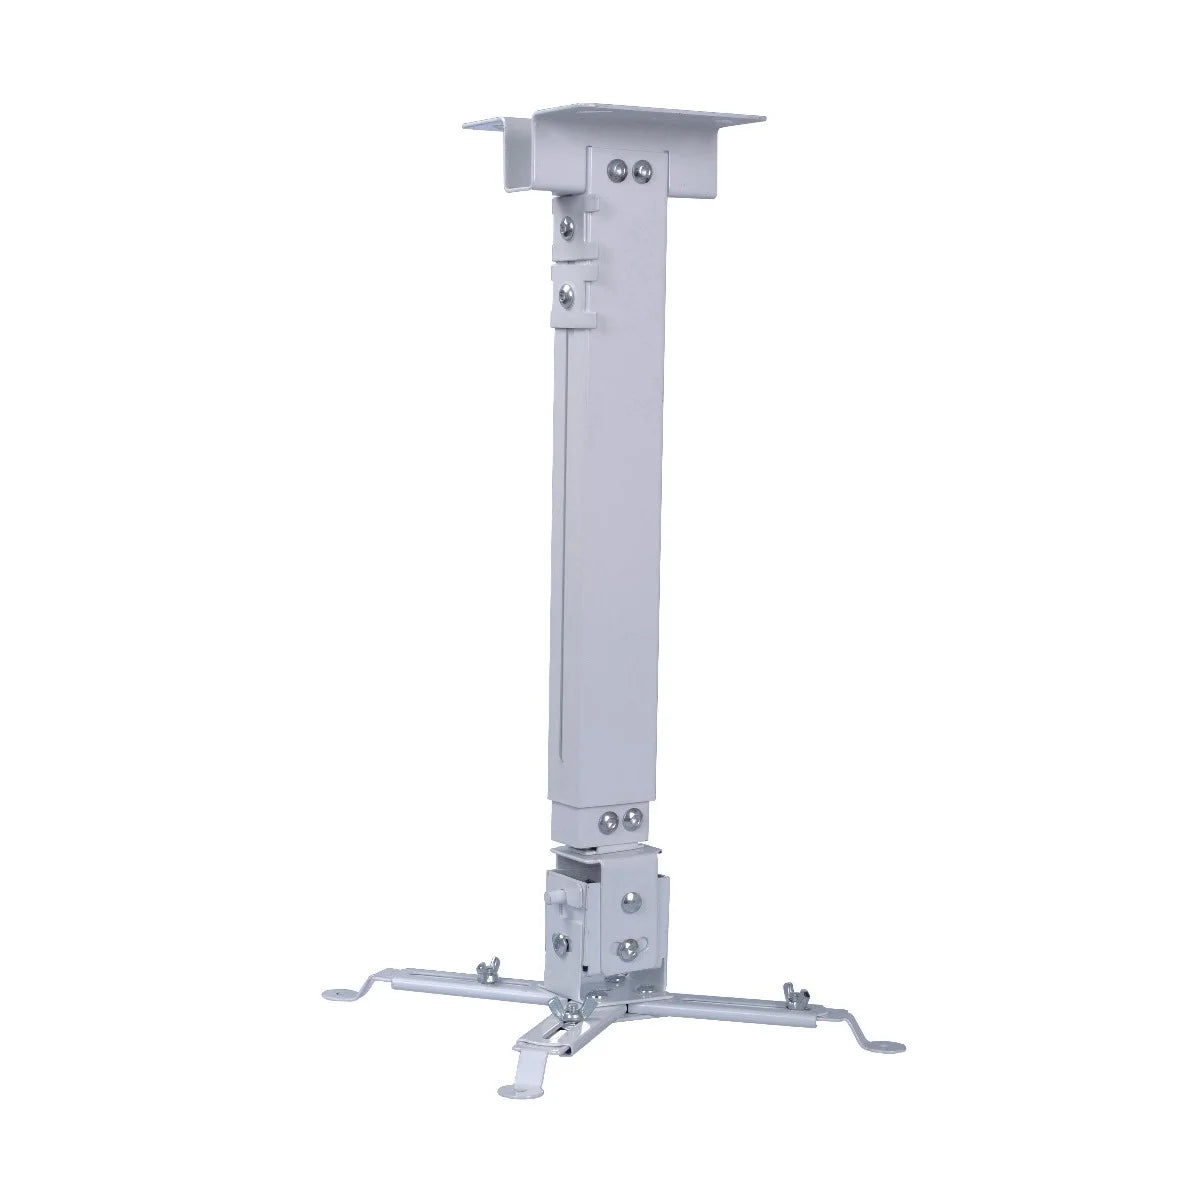 SkillTech - SH 6010PM - Universal Projector Ceiling Mount